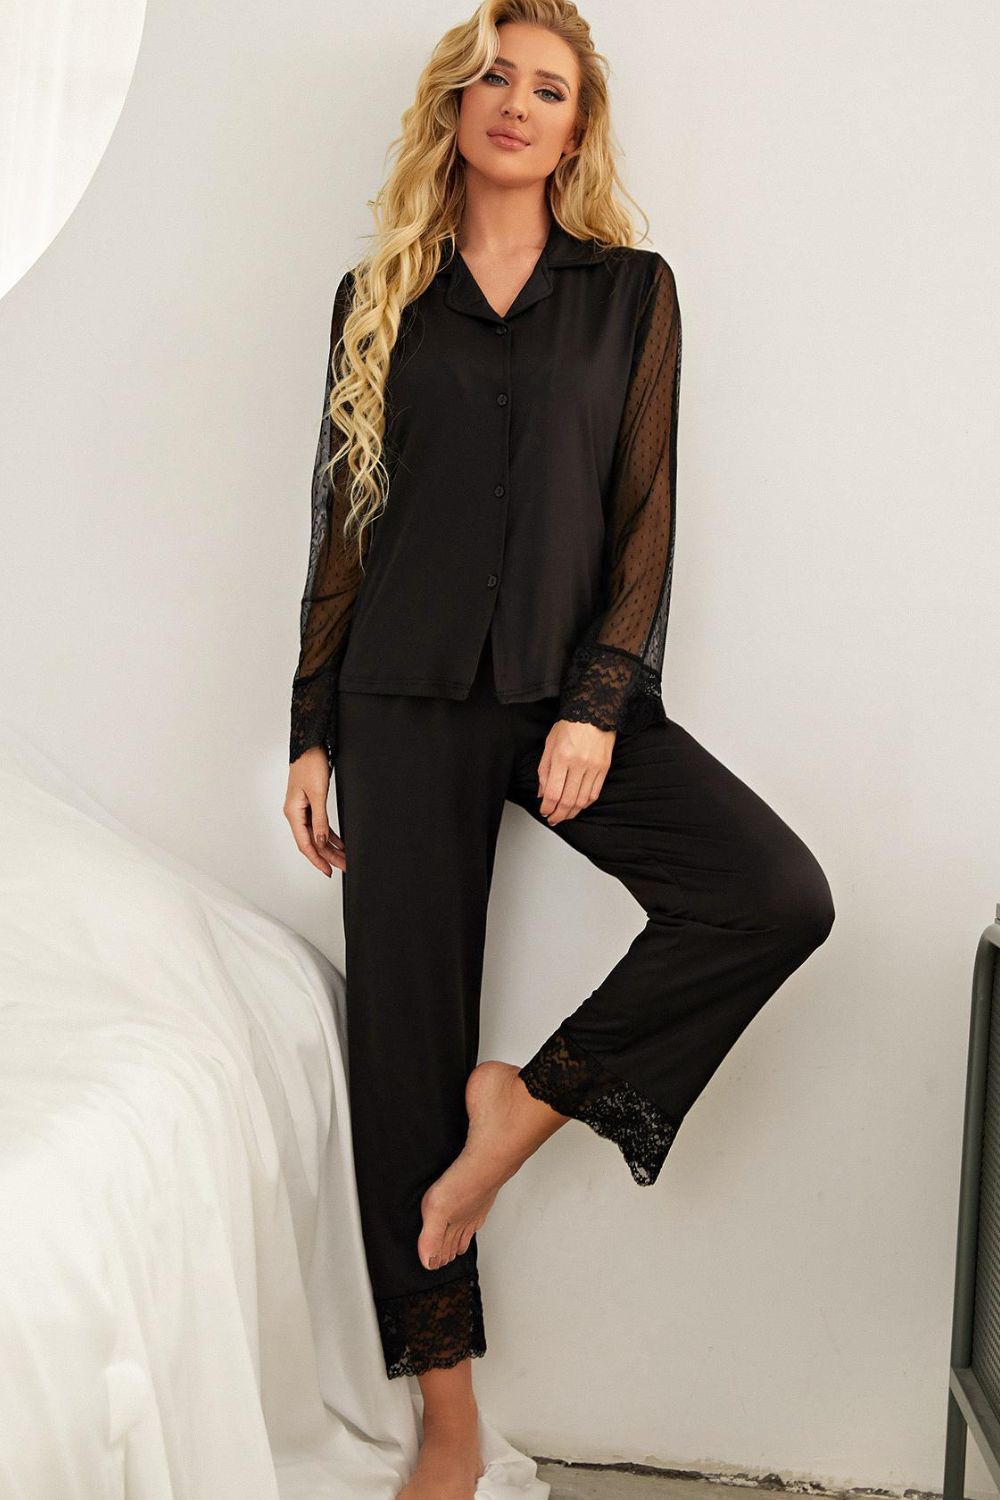 Model standing wearing black pajama set with lace arms